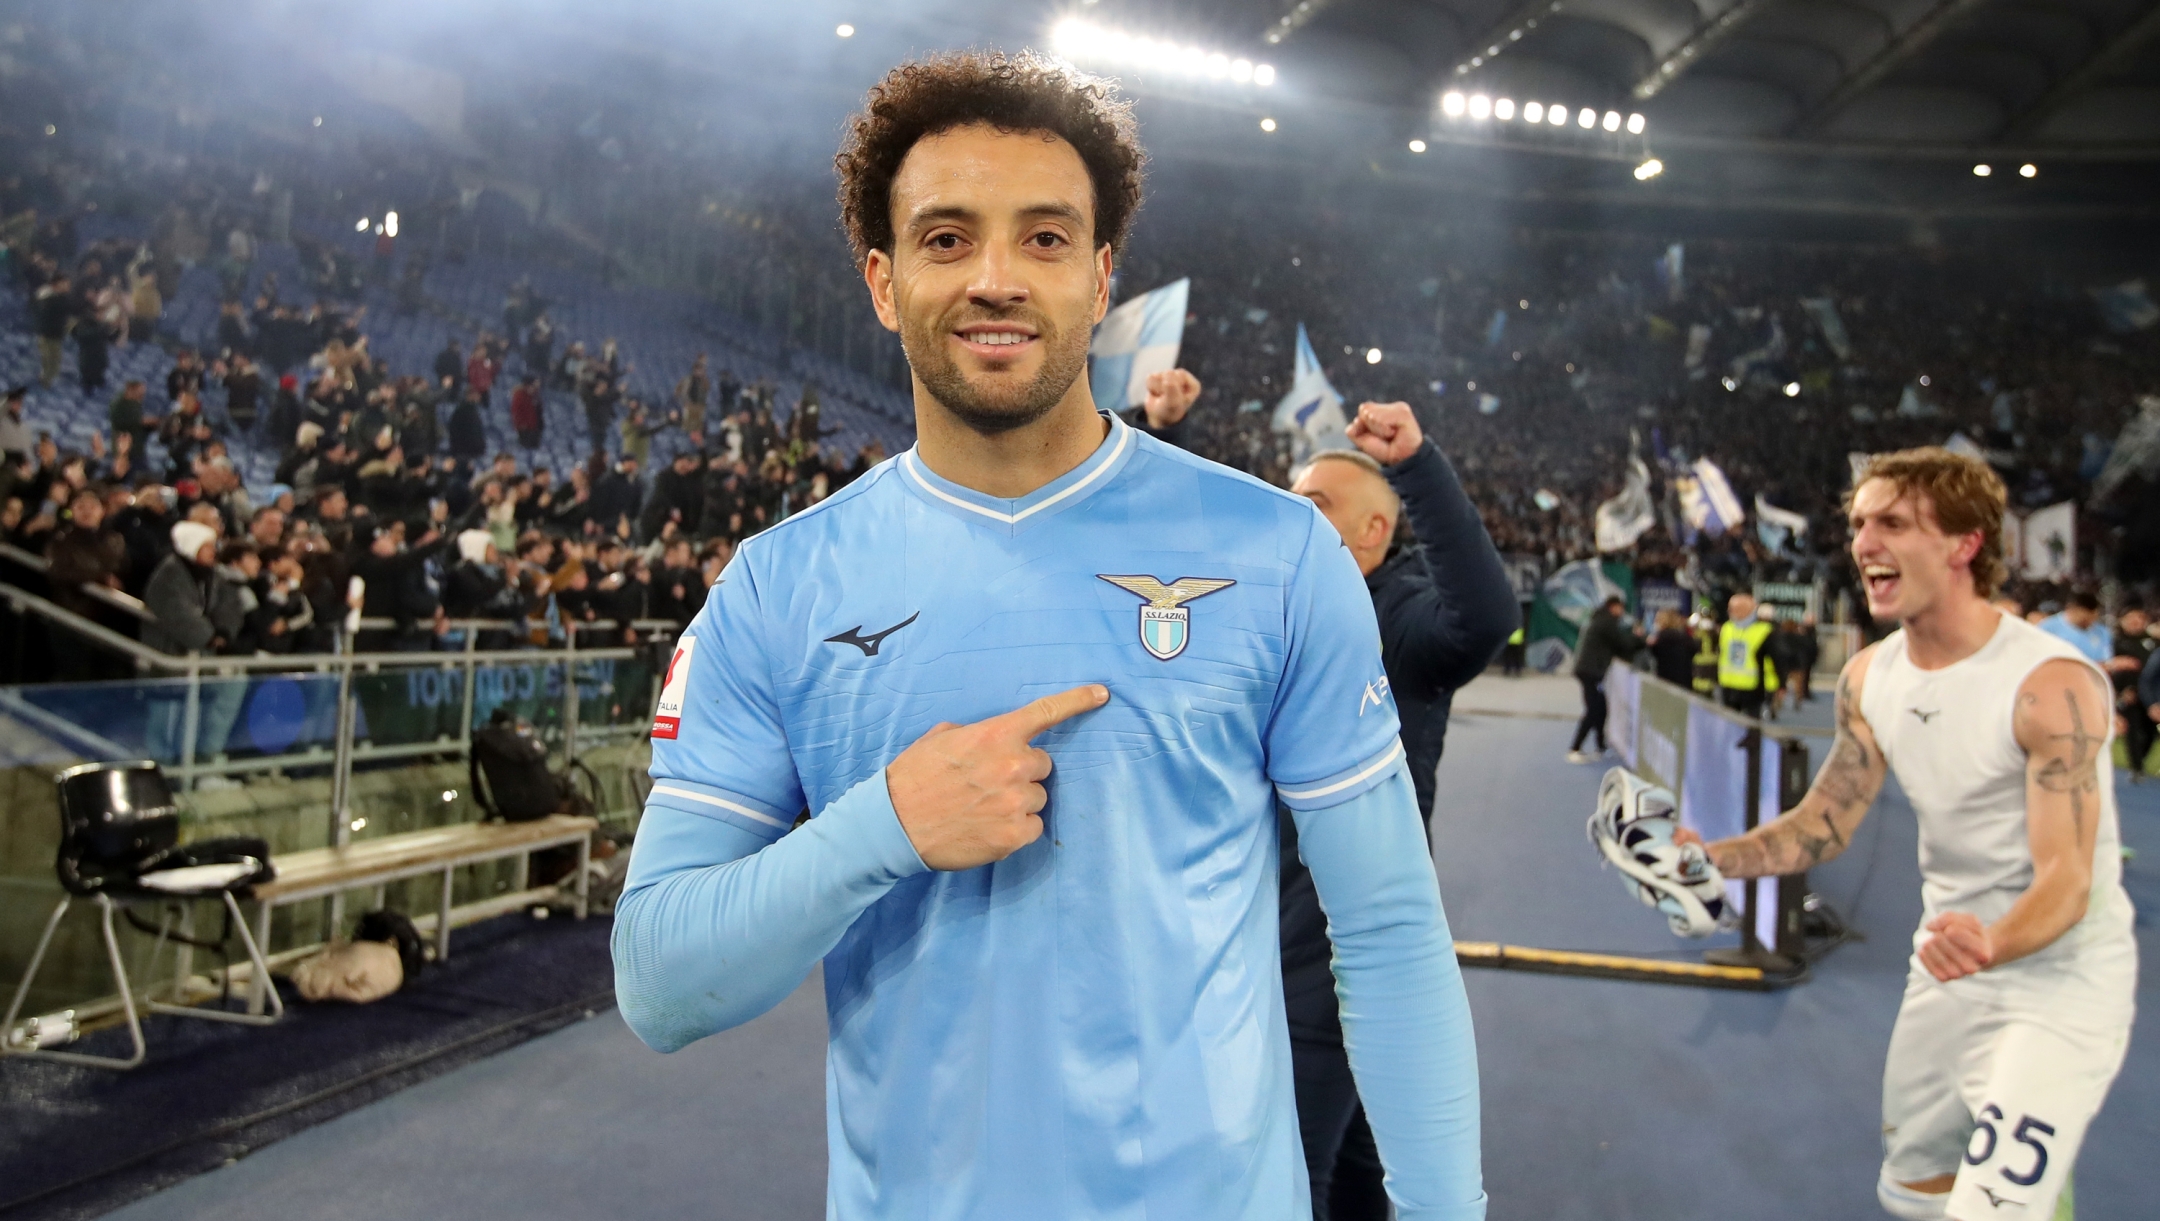 ROME, ITALY - JANUARY 10: Felipe Anderson of SS Lazio celebrates following the team's victory in the Coppa Italia match between SS Lazio and AS Roma at Stadio Olimpico on January 10, 2024 in Rome, Italy. (Photo by Paolo Bruno/Getty Images)